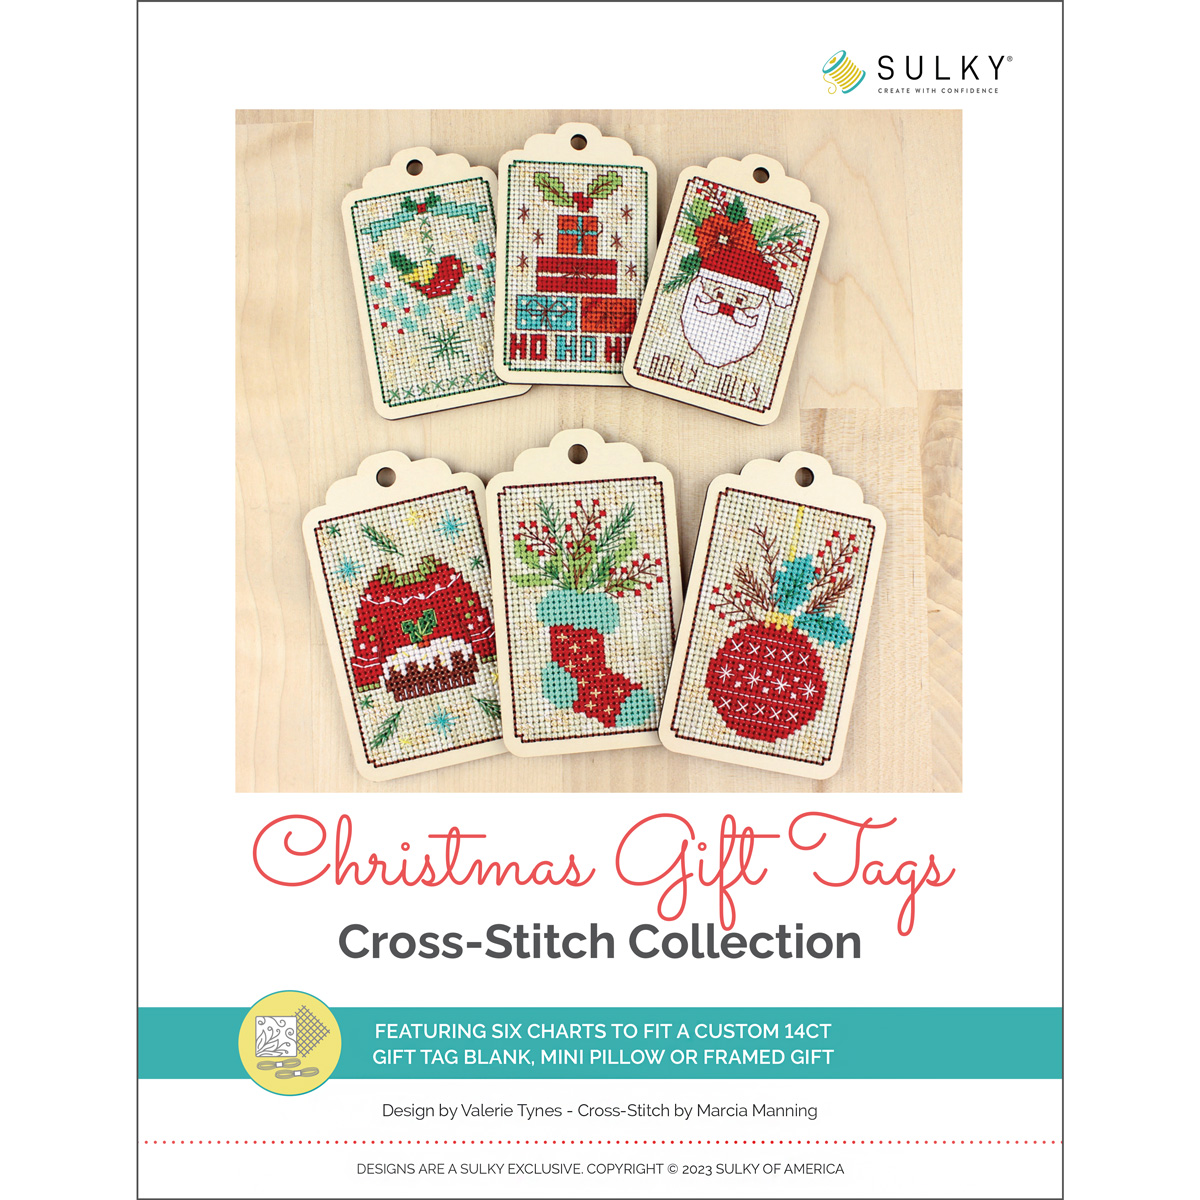 Christmas Gift Tag Cross-Stitch Chart Collection Questions & Answers